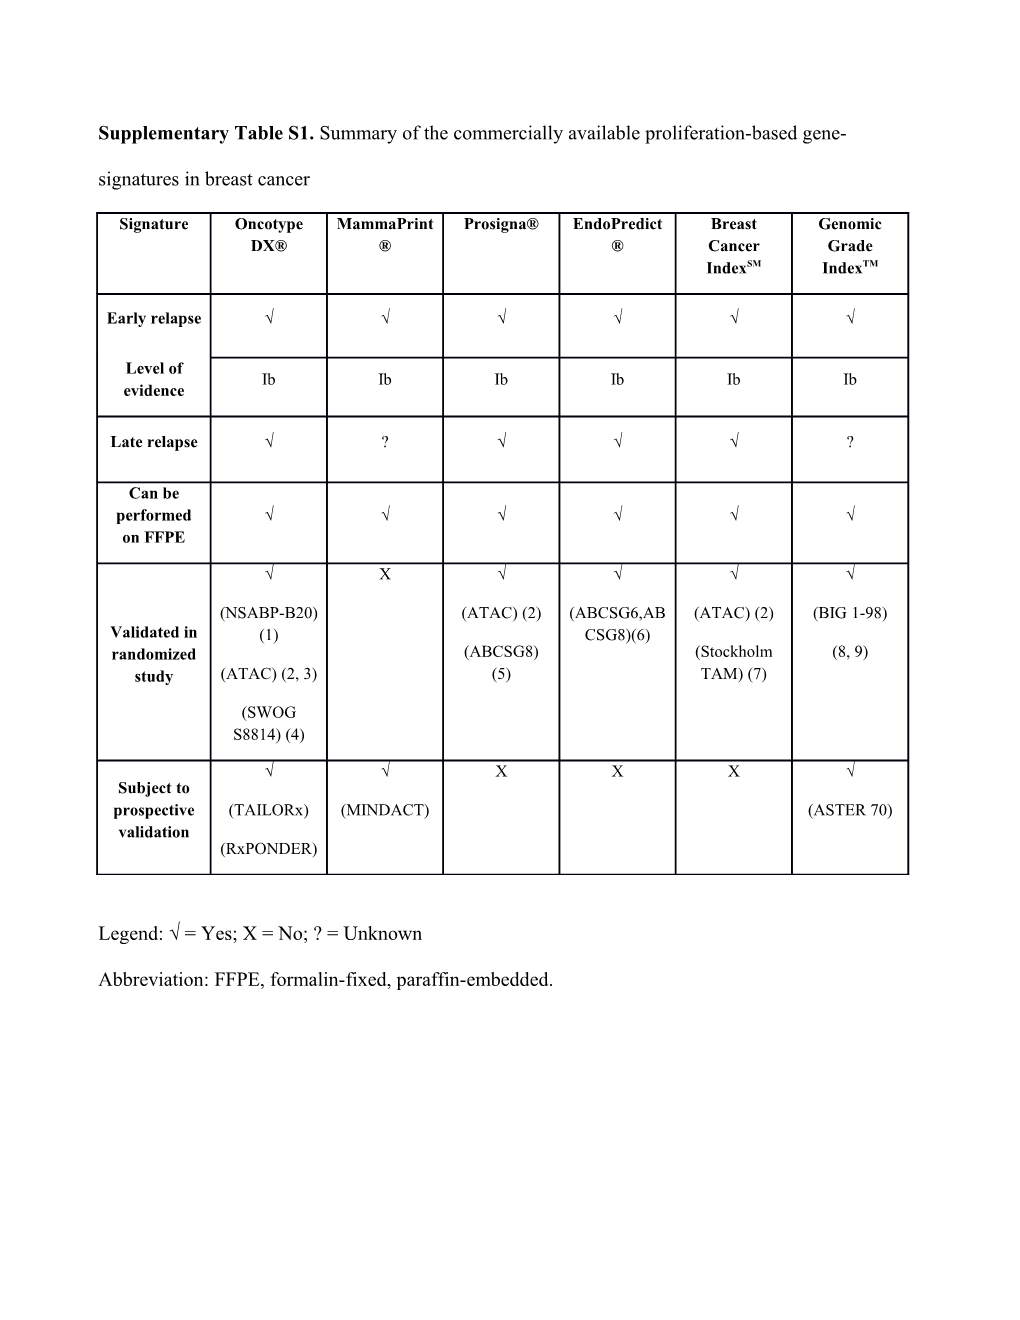 Supplementary Tables1. Summary of the Commercially Available Proliferation-Based